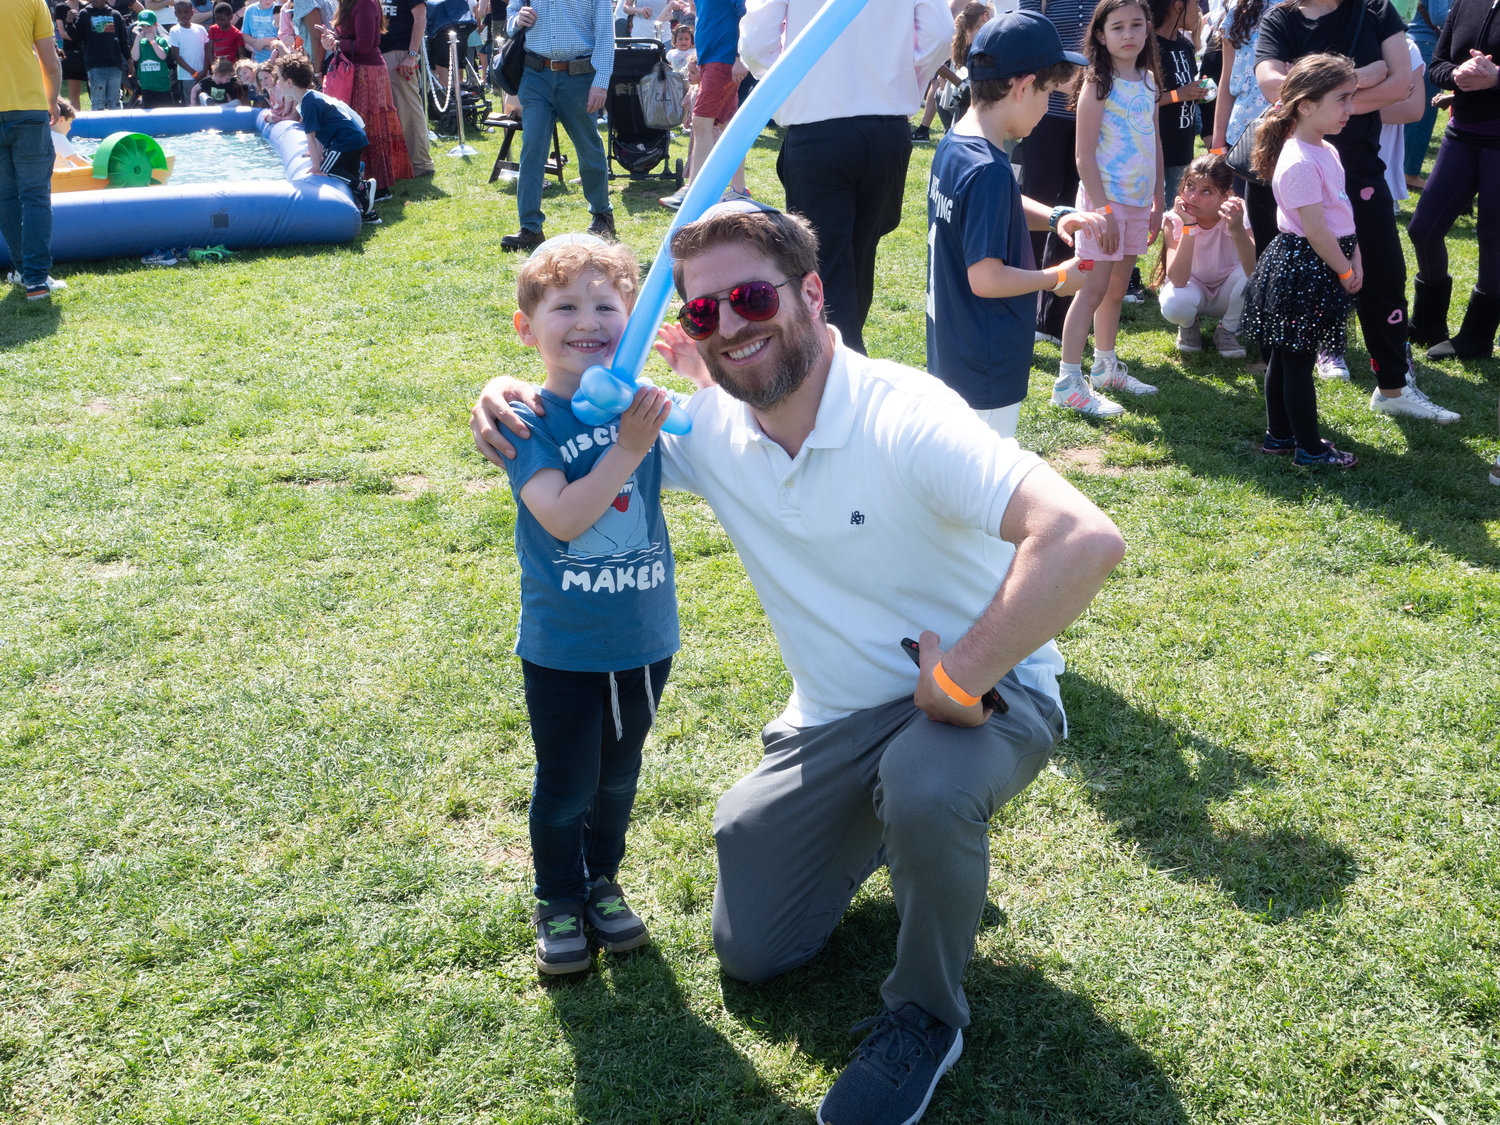 Simcha Smith, 4, showed off his balloon sword with his father, Aryeh Smith.